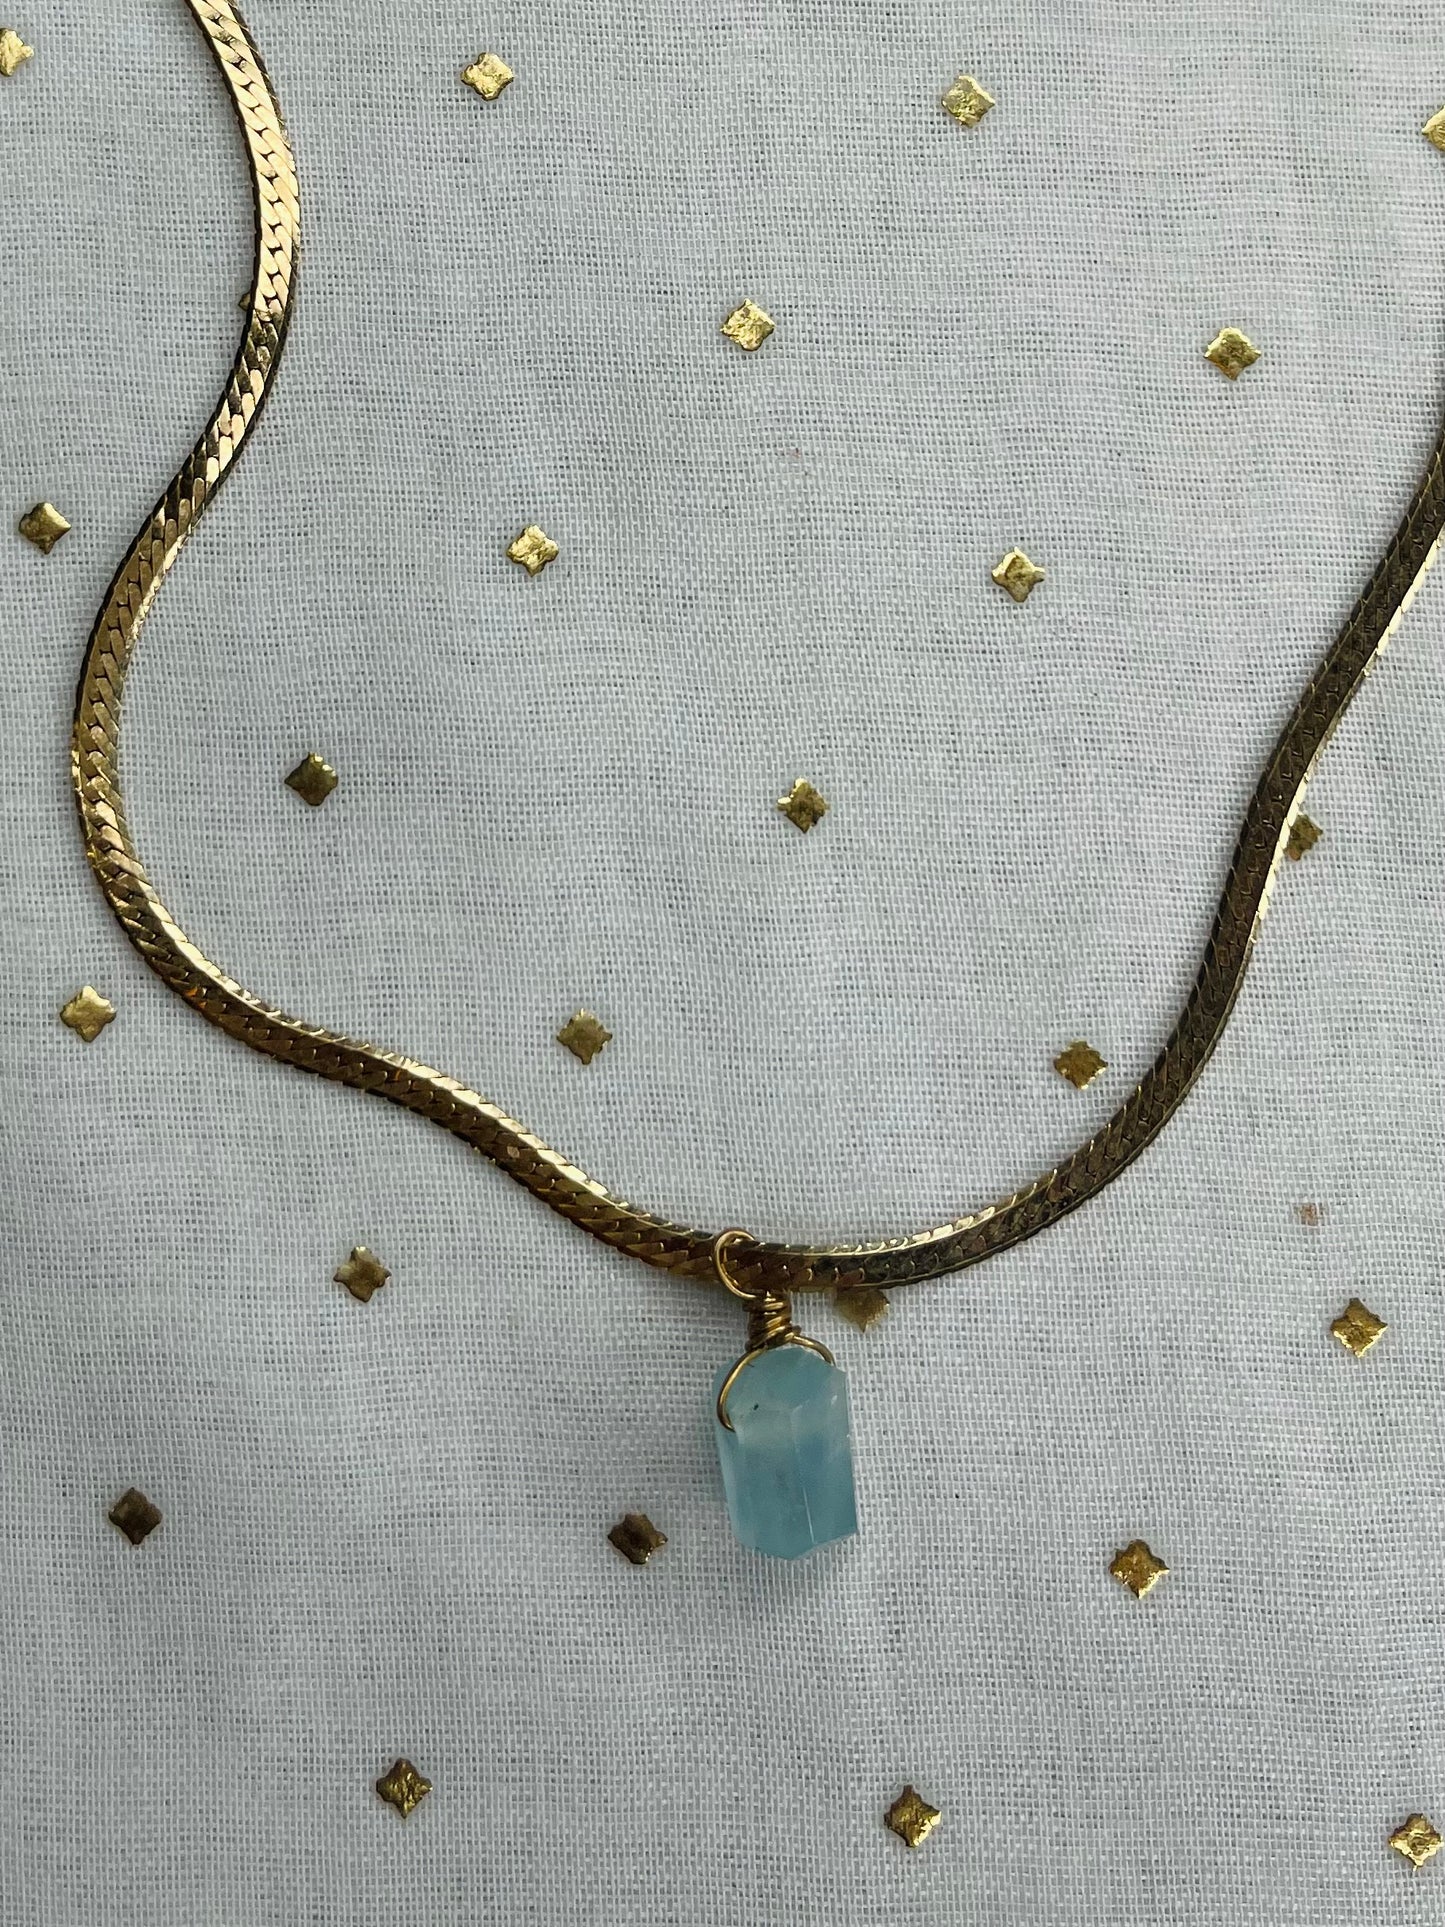 Dainty Baby Soul Chain w Blue Faceted Fluorite Necklace